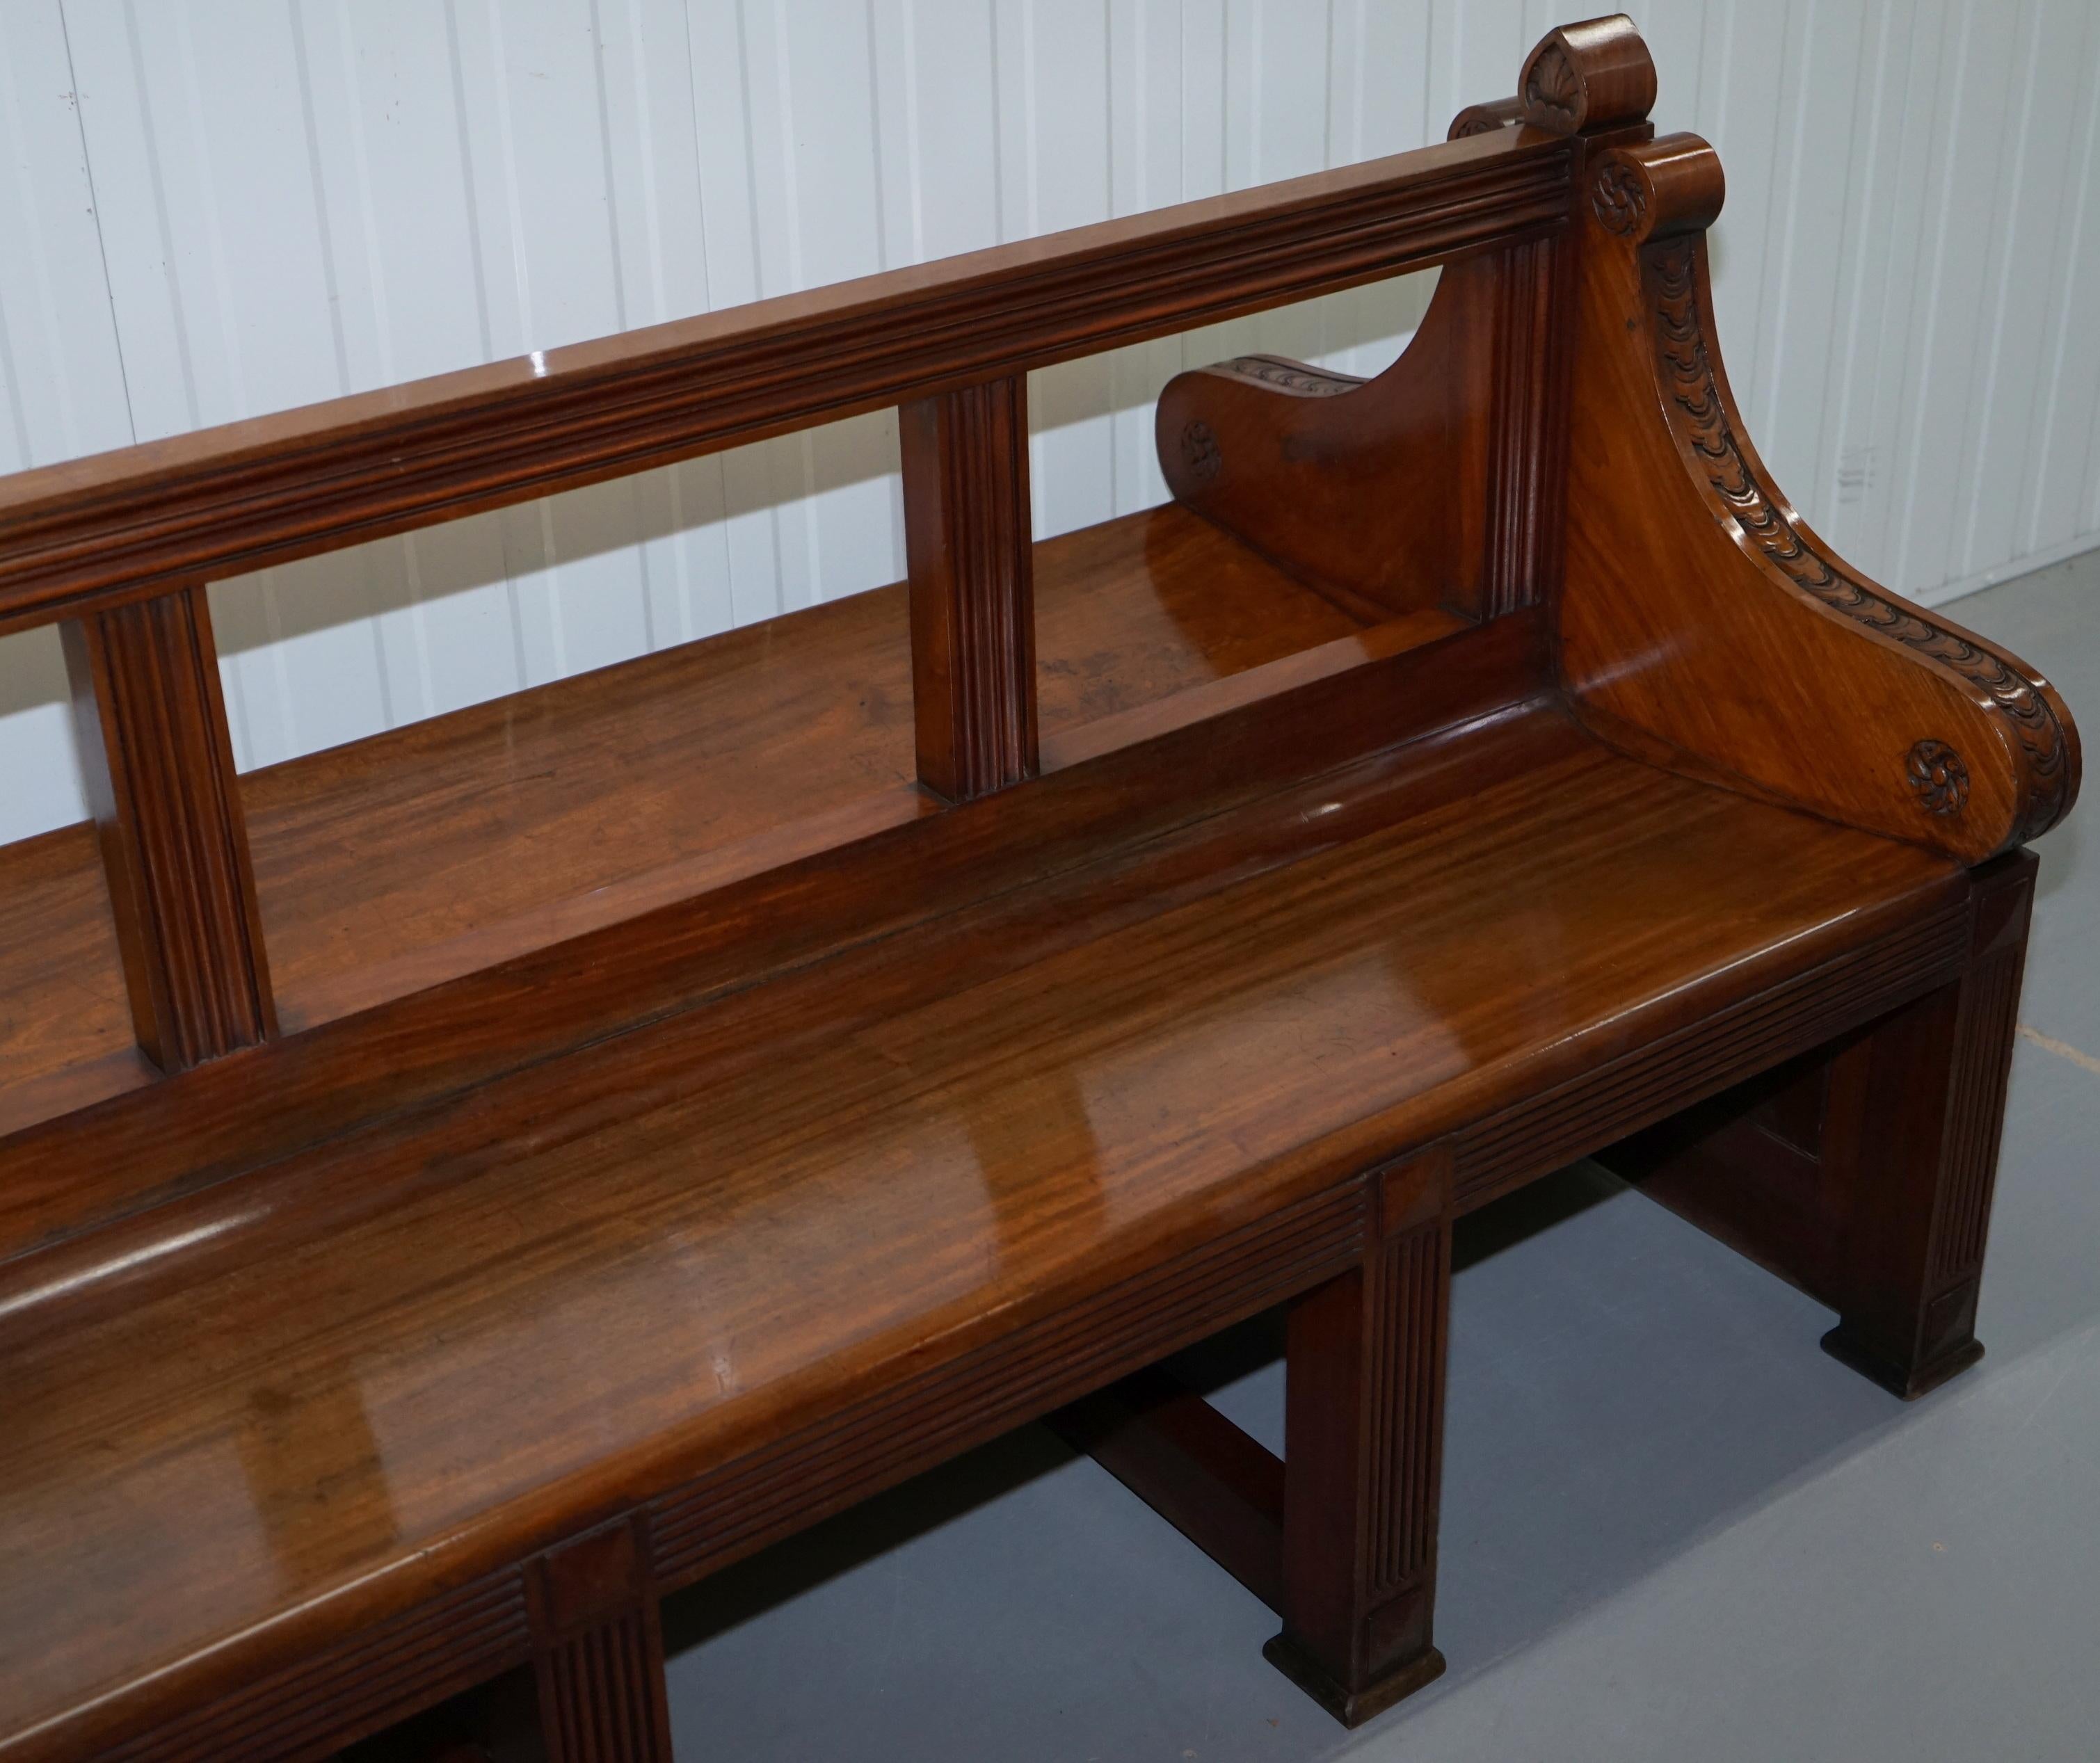 Hand-Carved Rare Victorian Walnut Double Sided Museum Gallery Pew Bench Pugin Gothic Steeple For Sale